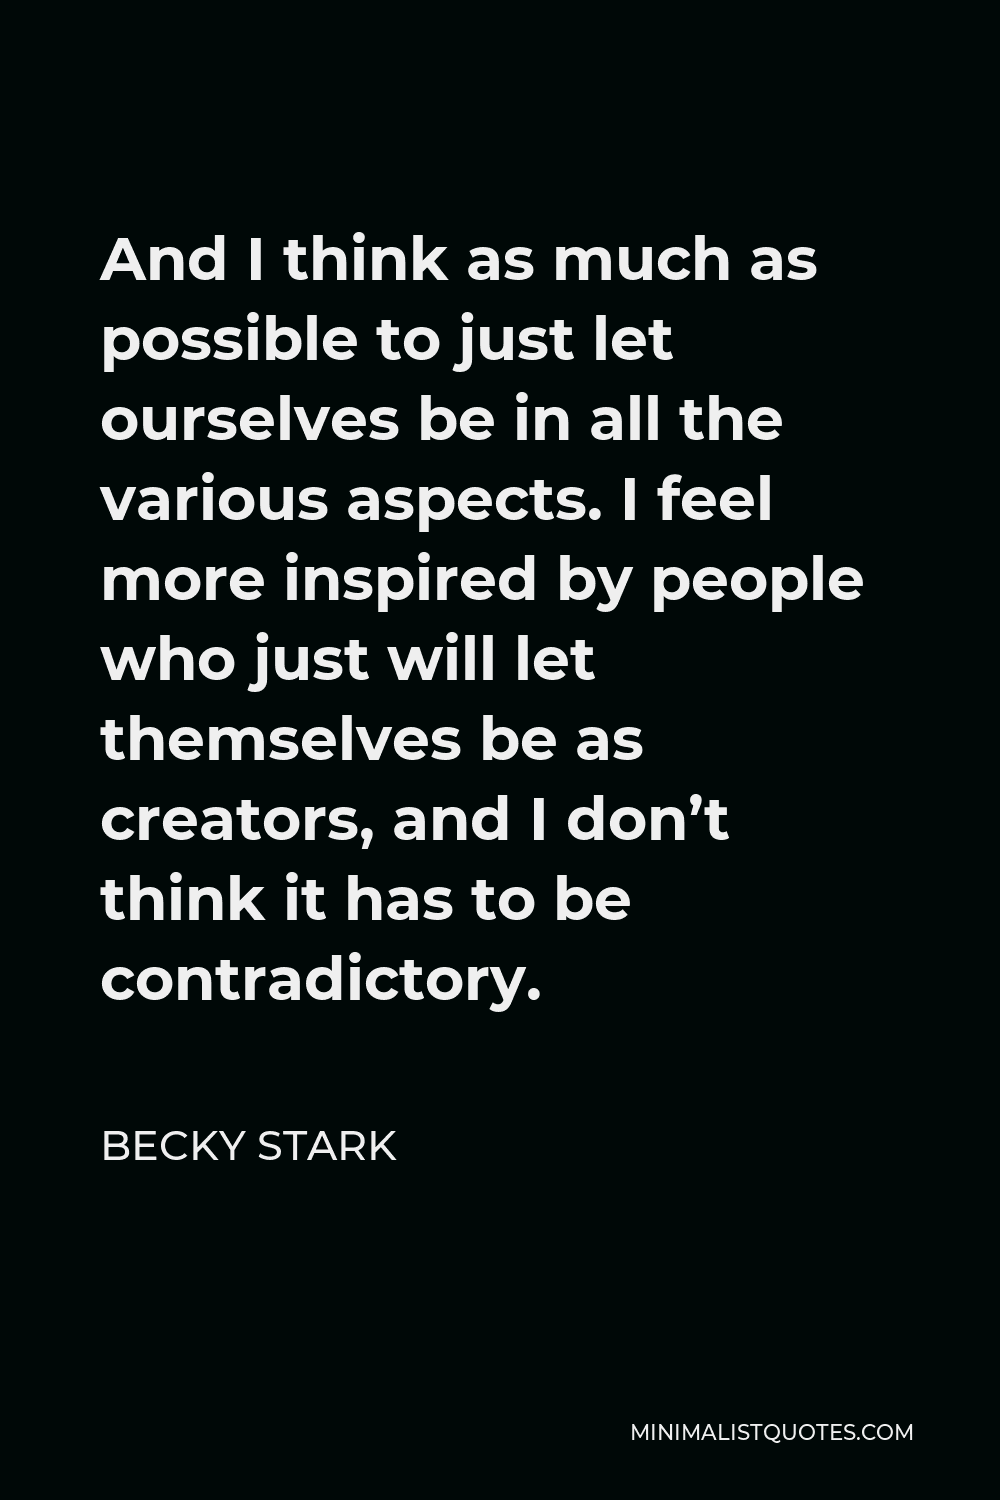 Becky Stark Quote - And I think as much as possible to just let ourselves be in all the various aspects. I feel more inspired by people who just will let themselves be as creators, and I don’t think it has to be contradictory.